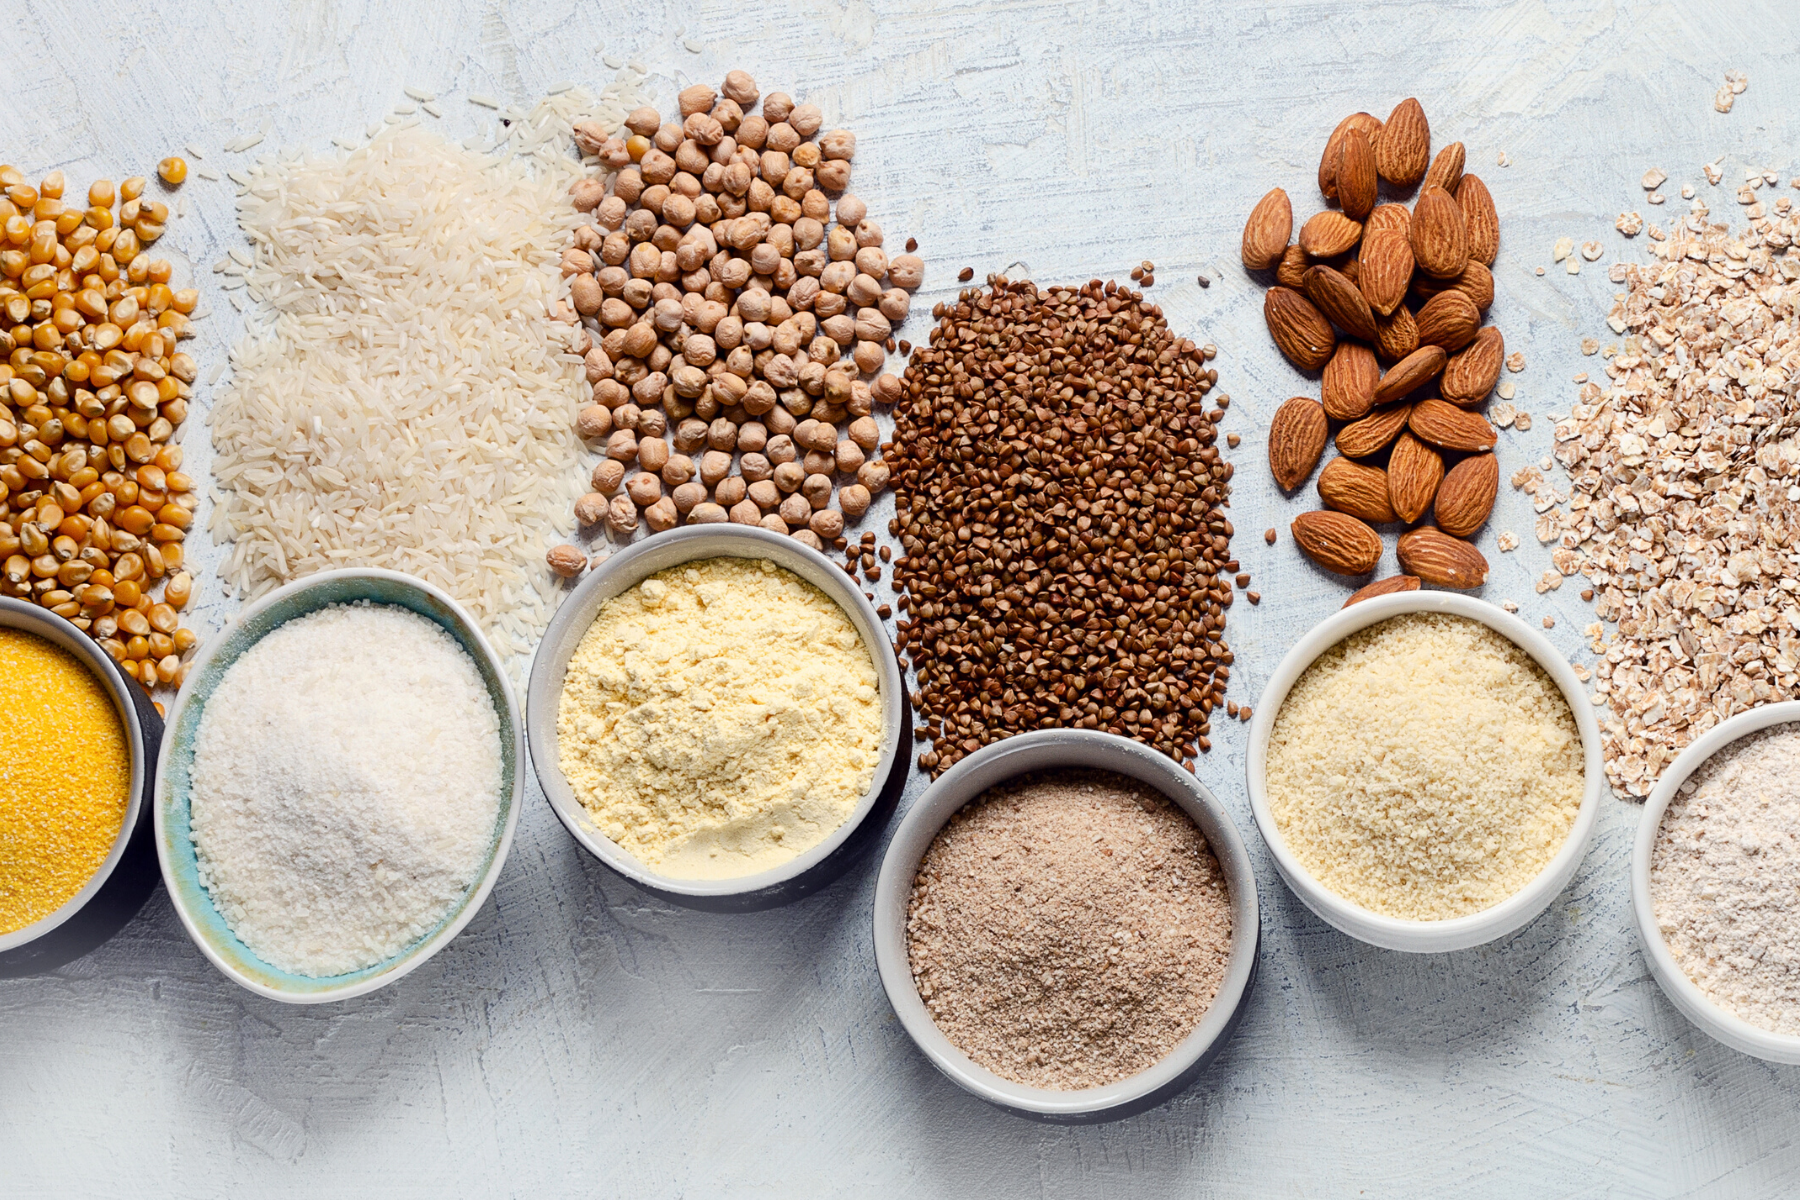 12 Of The Best Vegan Protein Sources